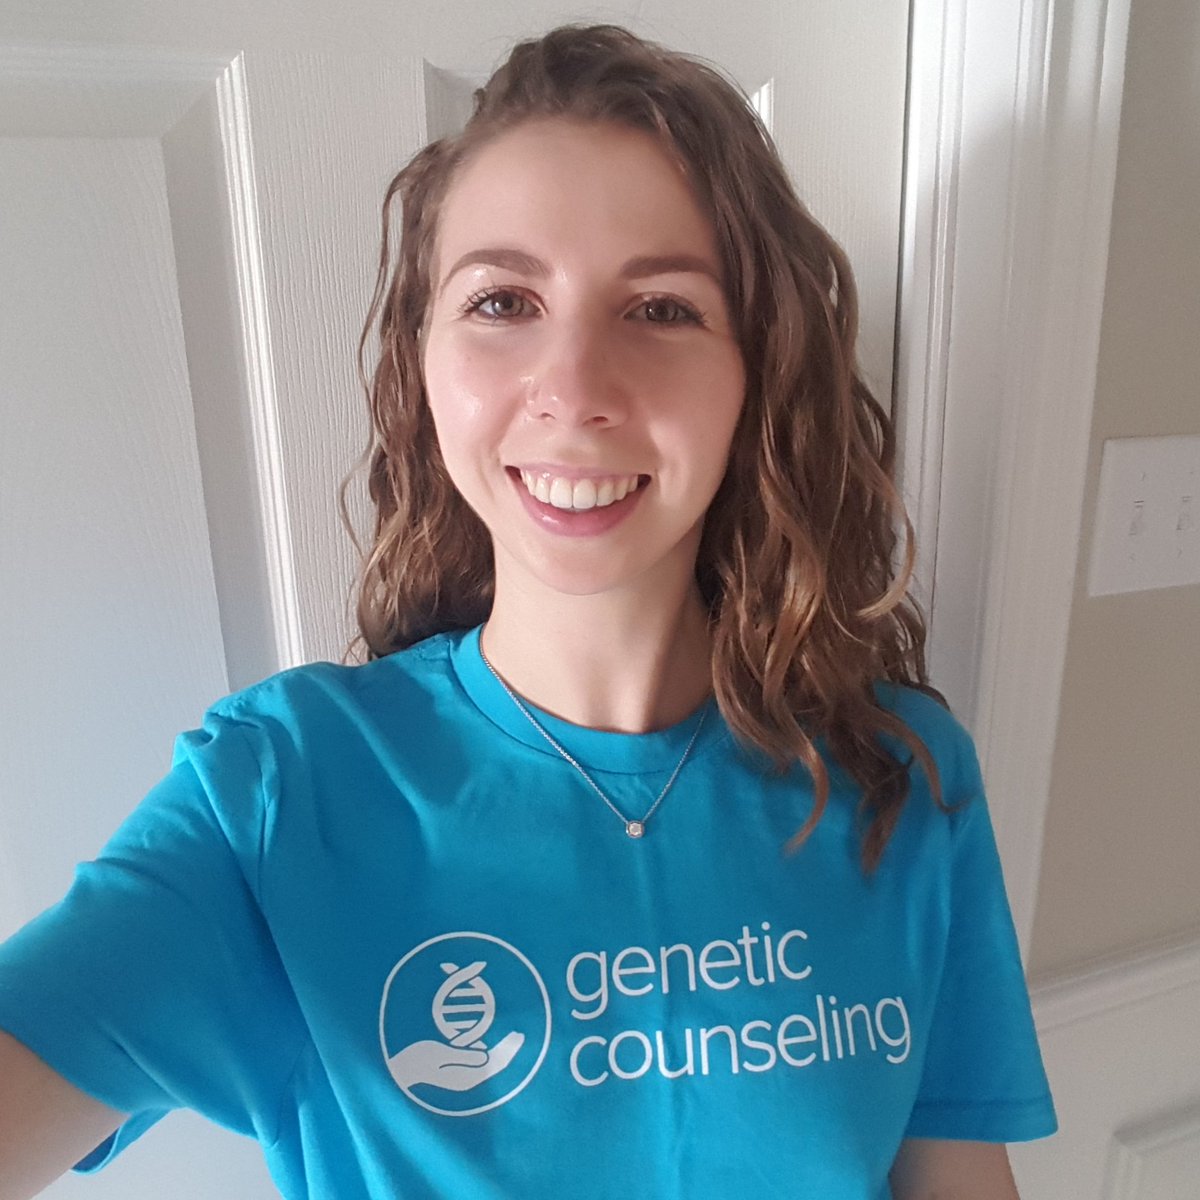 Proud to be part of a profession that focuses not only on the medical aspects of genetic disease, but also on the entire patient and family🧬#IAmAGeneticCounsellor  #GeneticCounsellorAwarenessDay #GCchat